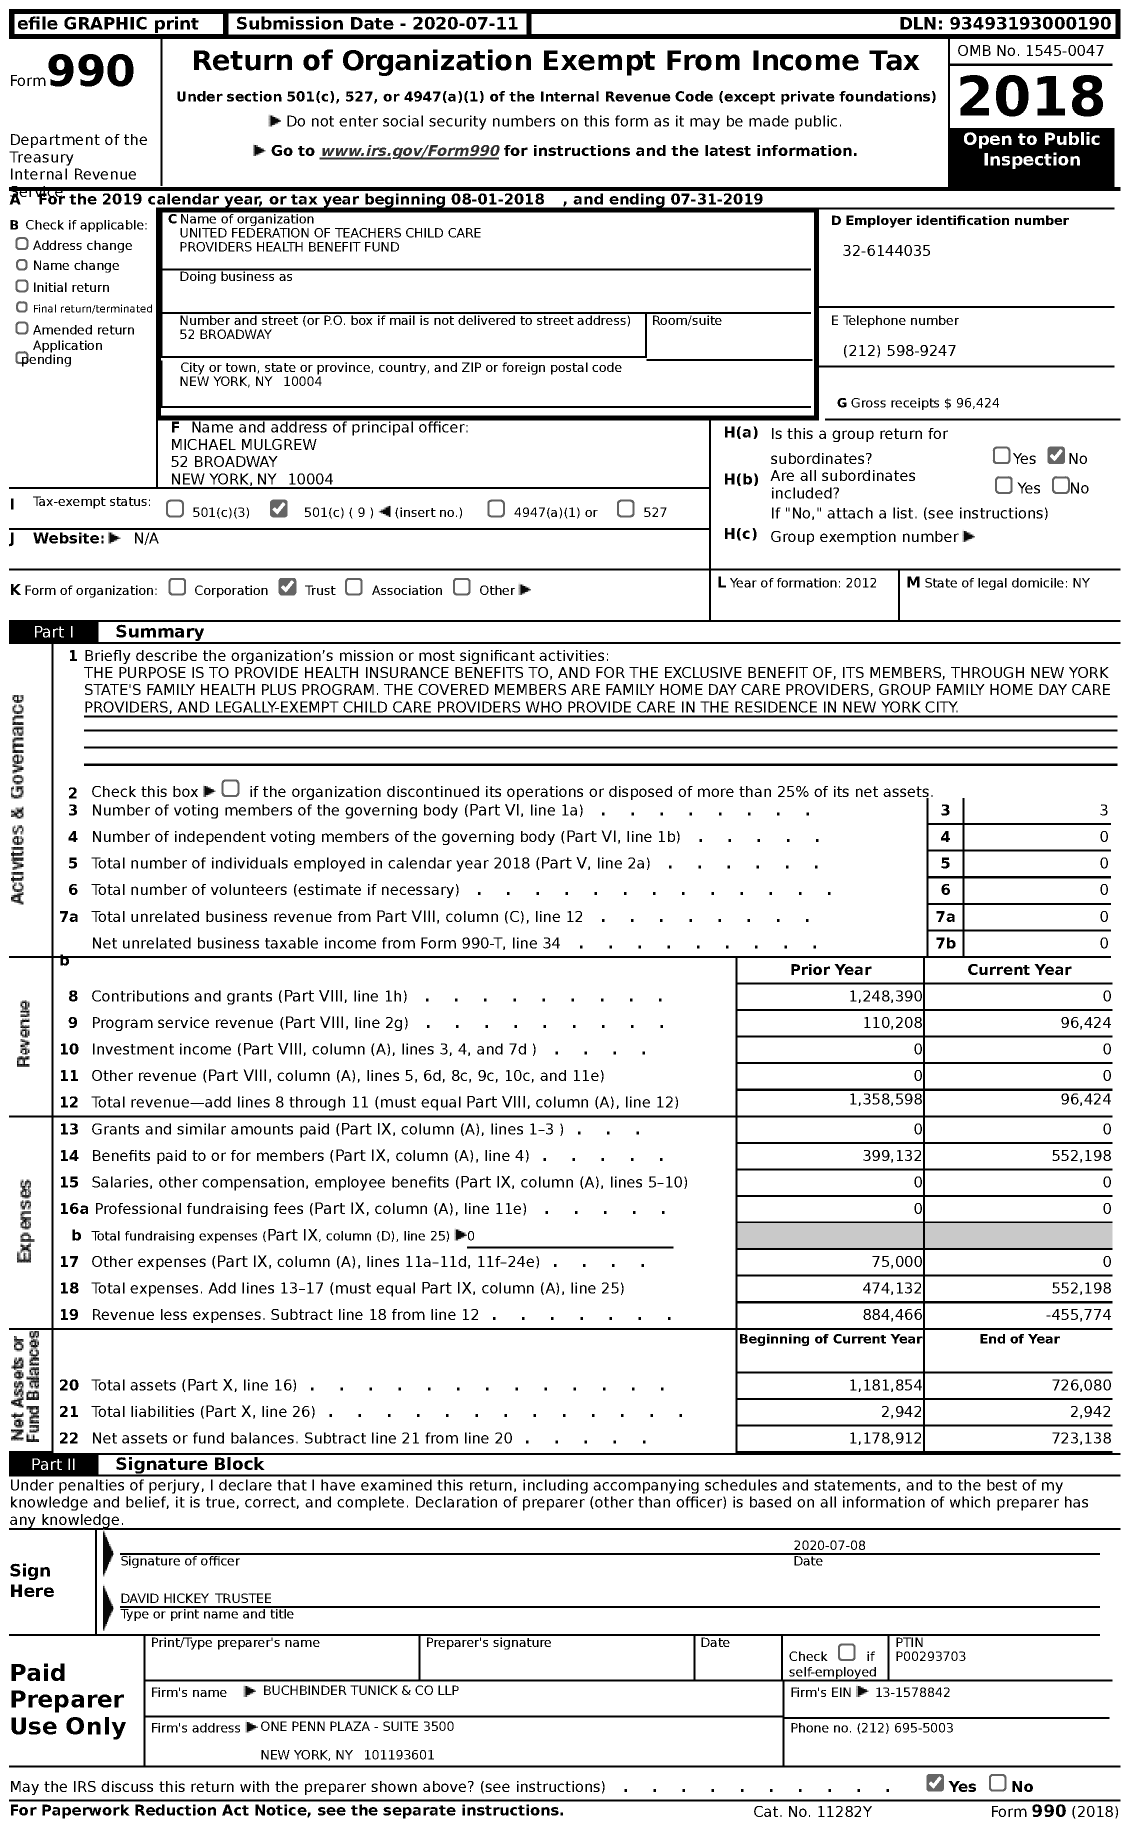 Image of first page of 2018 Form 990 for United Federation of Teachers Child Care Providers Health Benefit Fund